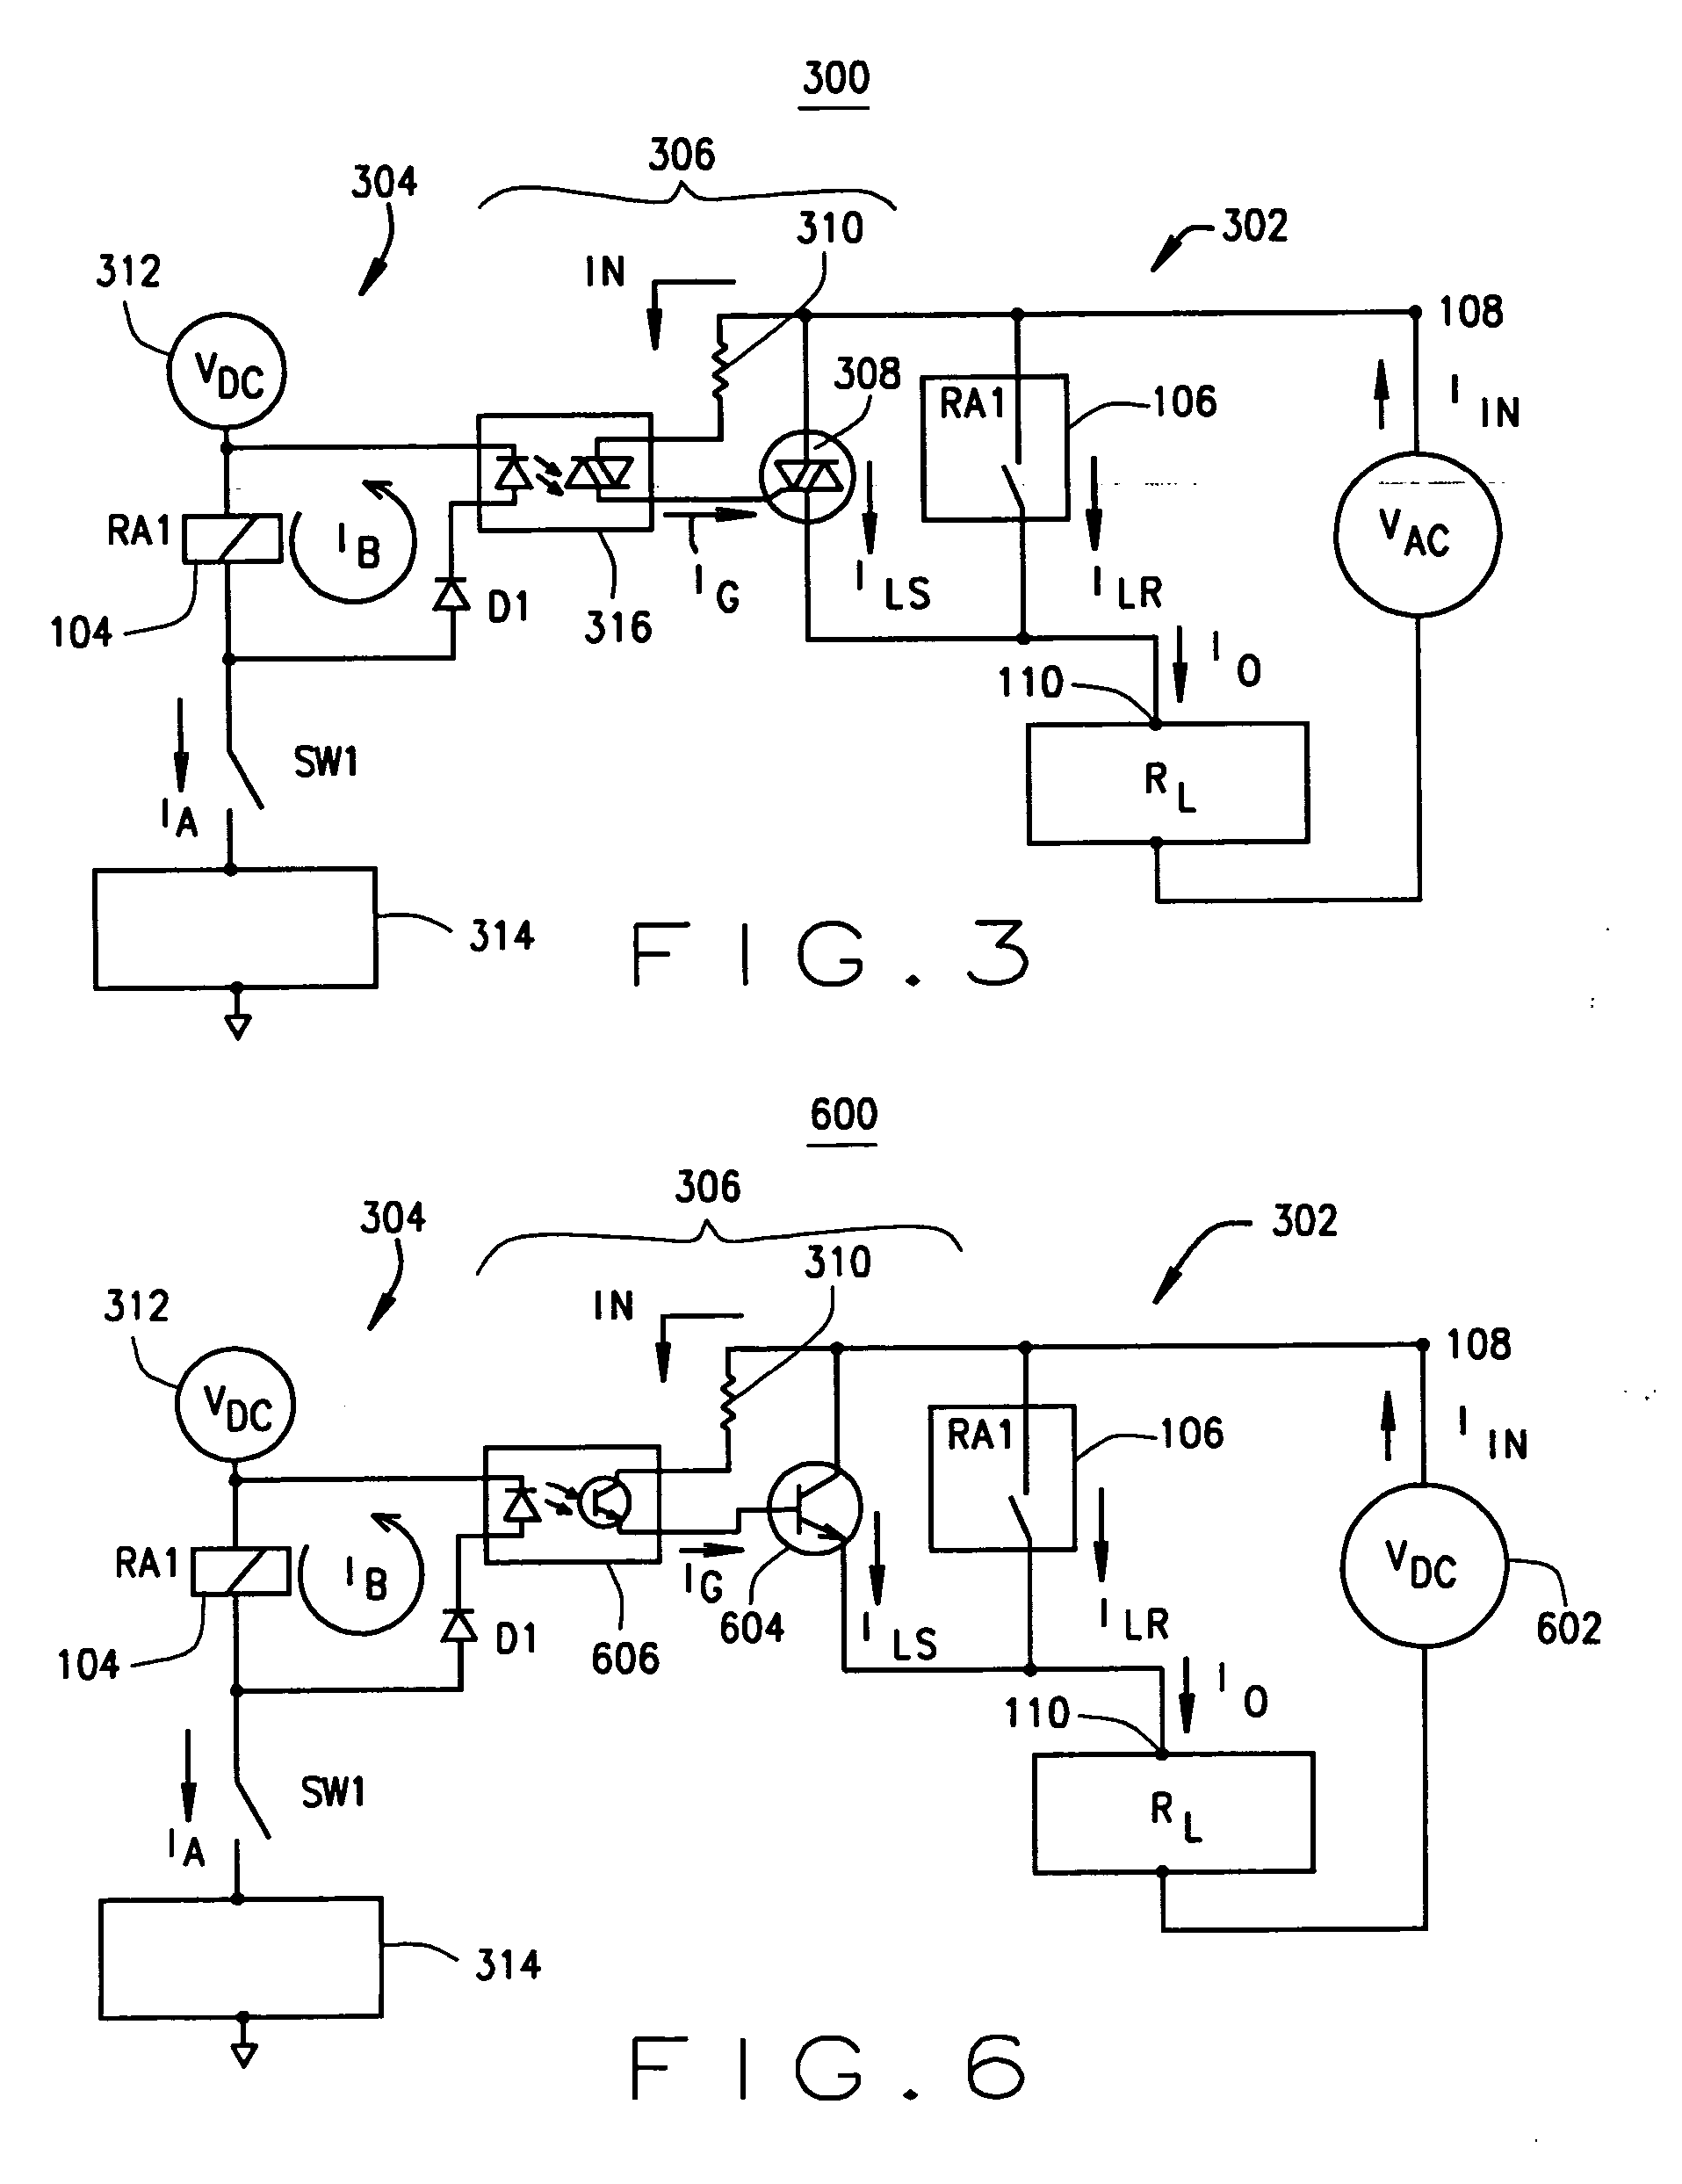 Apparatus and method for relay contact arc suppression